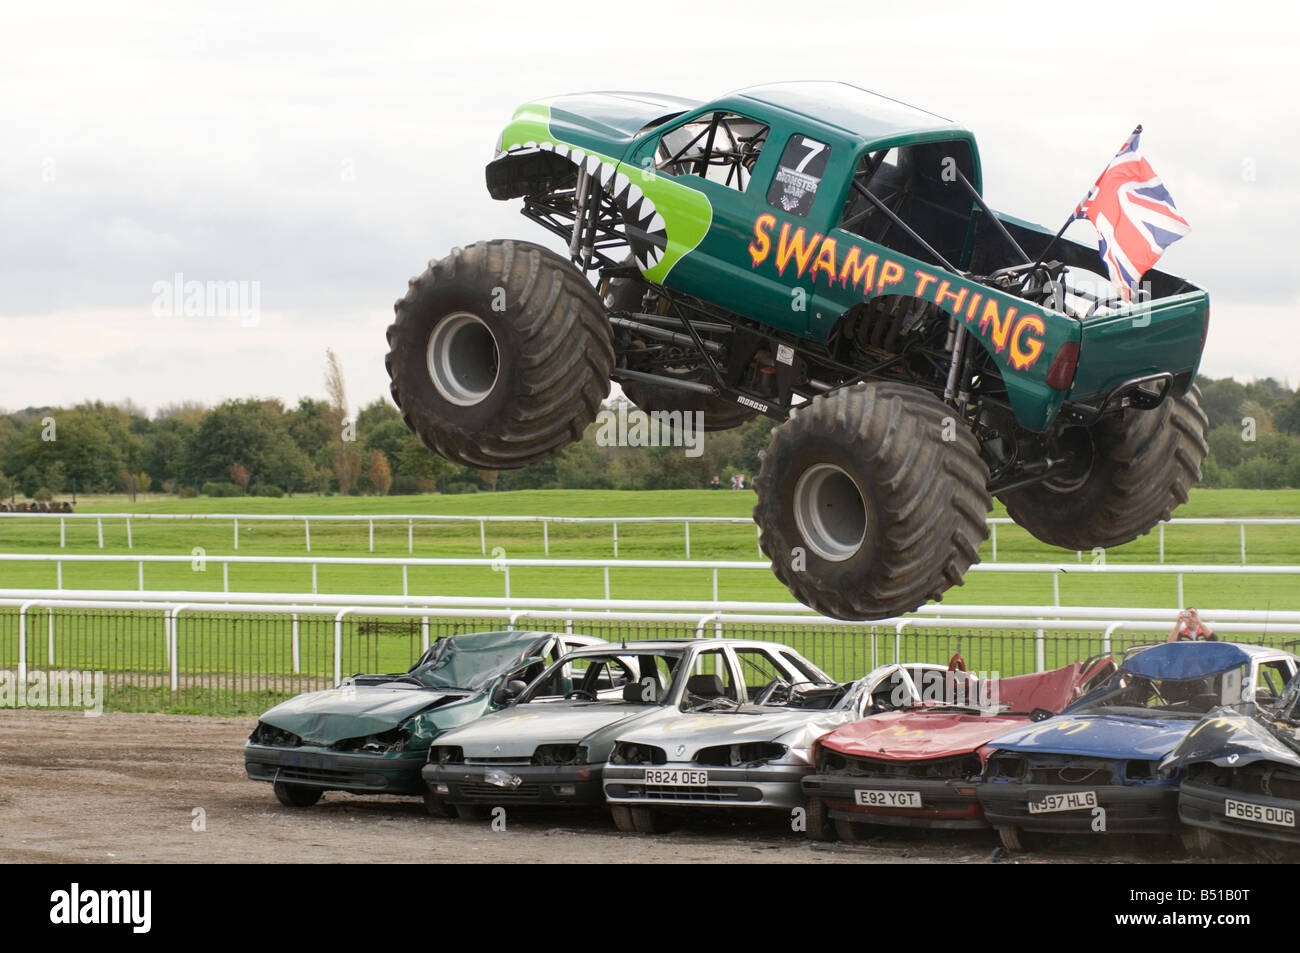 Monster Truck Jumping Over Crushed Cars In A Race Stock Photo Alamy